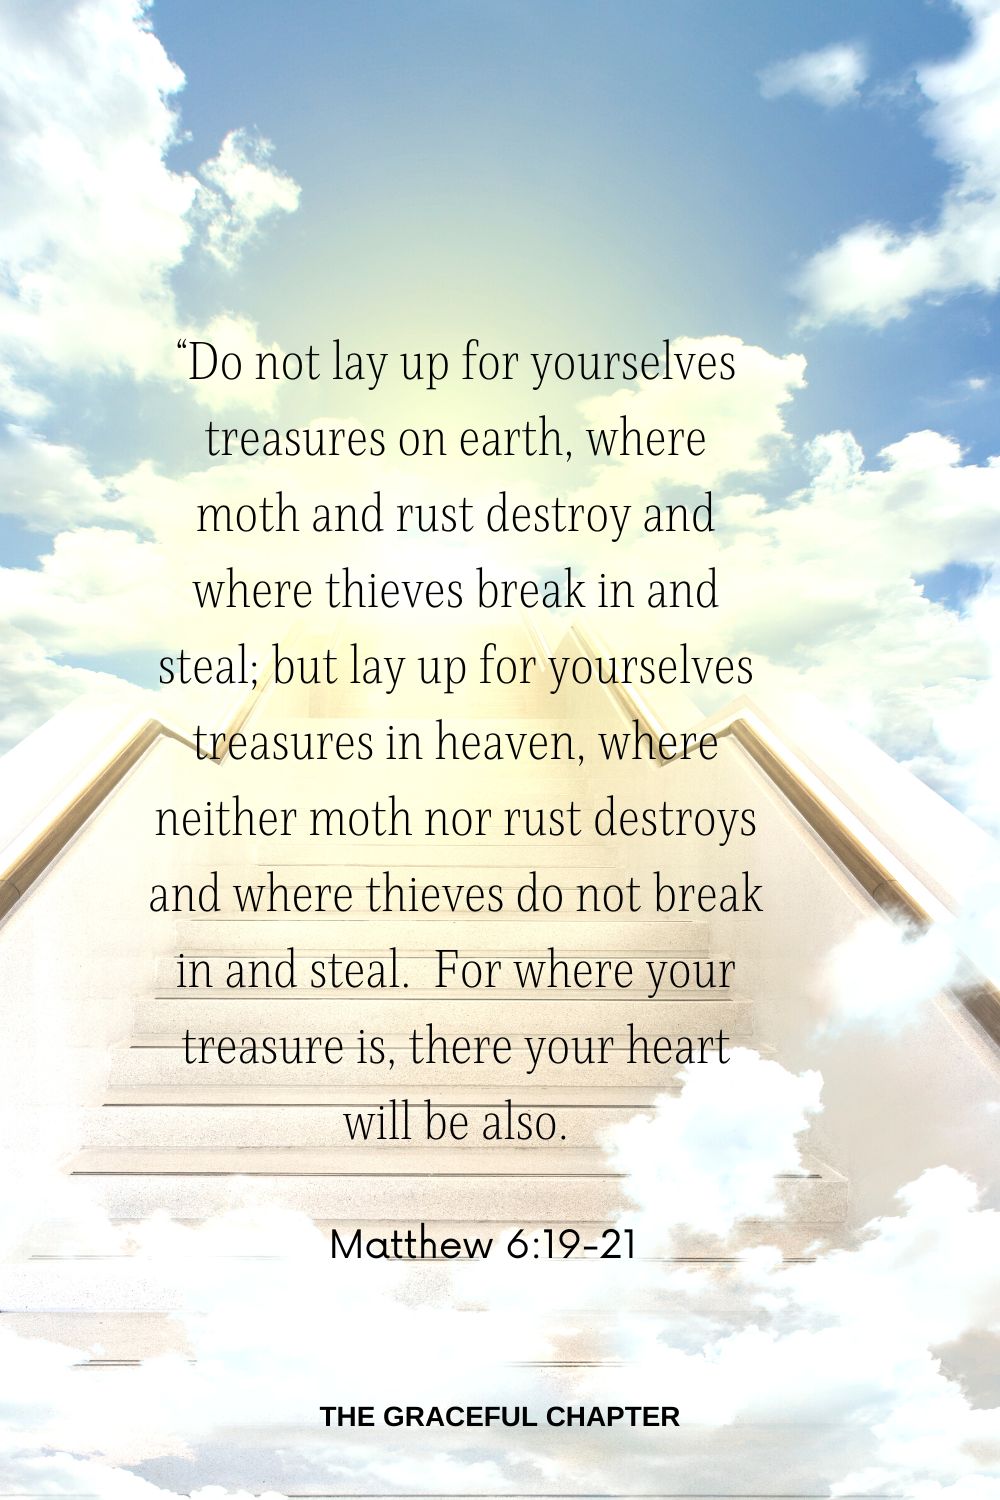 “Do not lay up for yourselves treasures on earth, where moth and rust destroy and where thieves break in and steal; but lay up for yourselves treasures in heaven, where neither moth nor rust destroys and where thieves do not break in and steal.  For where your treasure is, there your heart will be also. Matthew 6:19-21